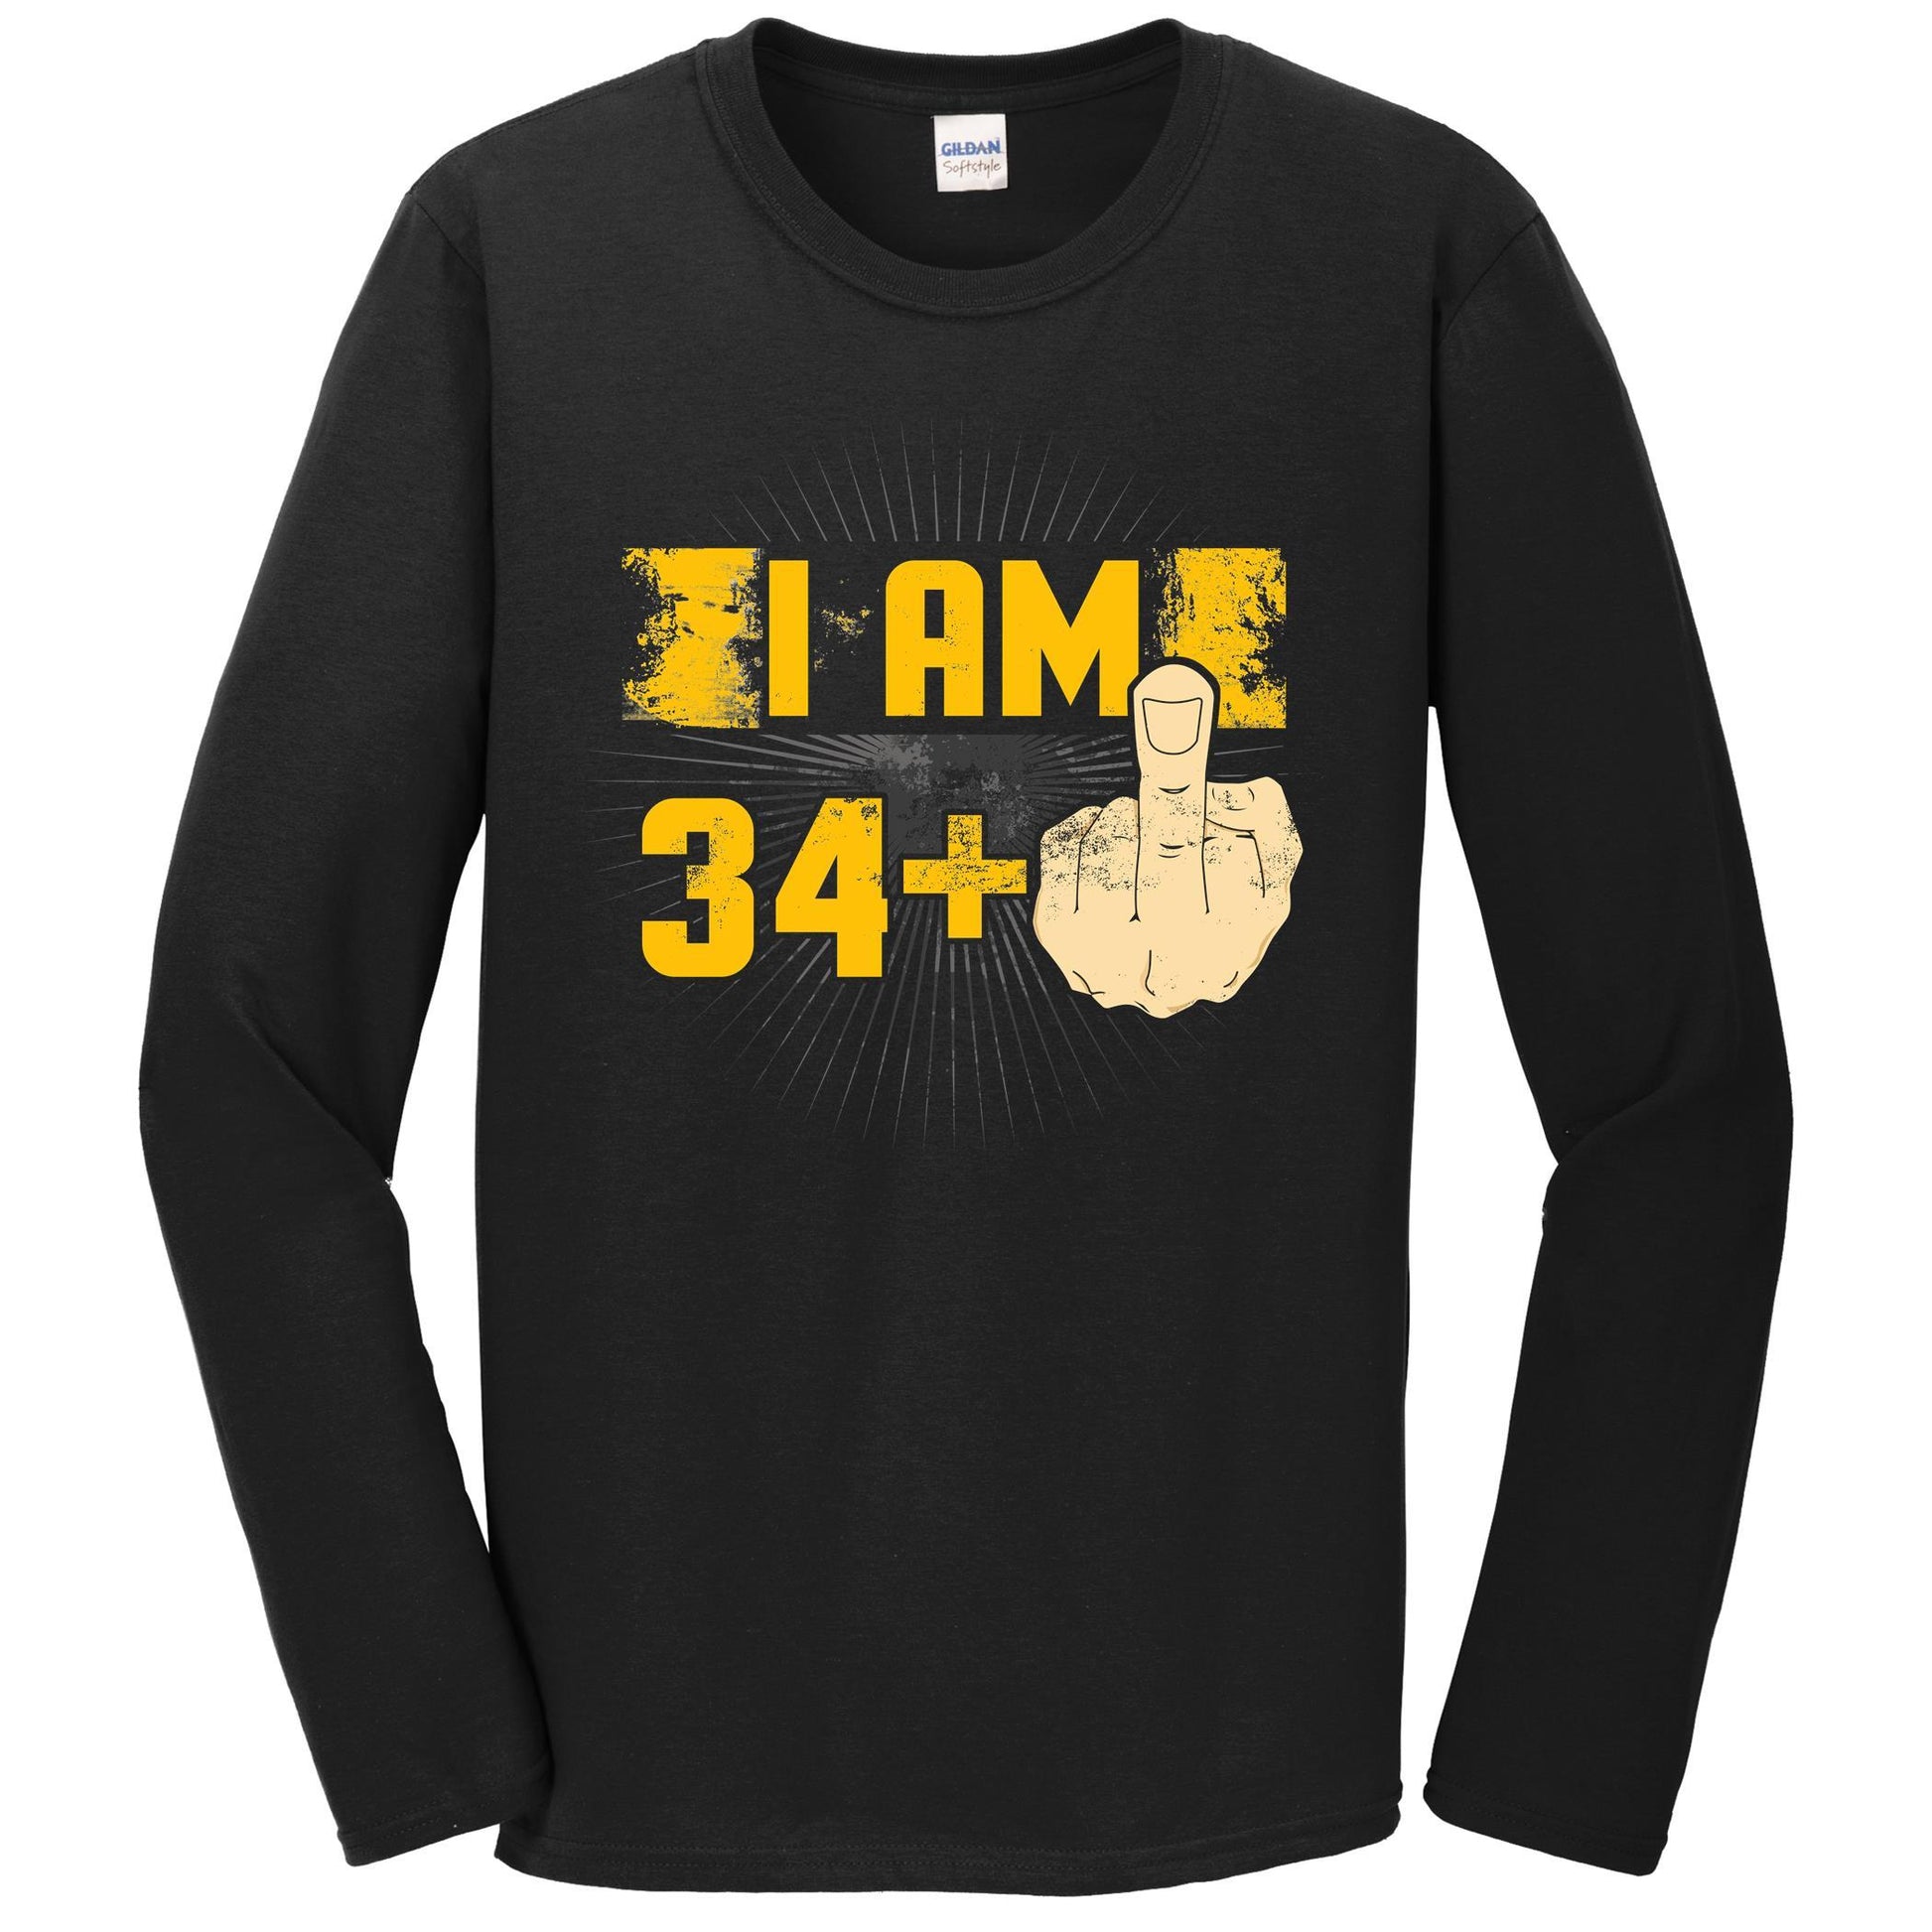 35th Birthday Shirt For Men - I Am 34 Plus Middle Finger 35 Years Old Long Sleeve T-Shirt